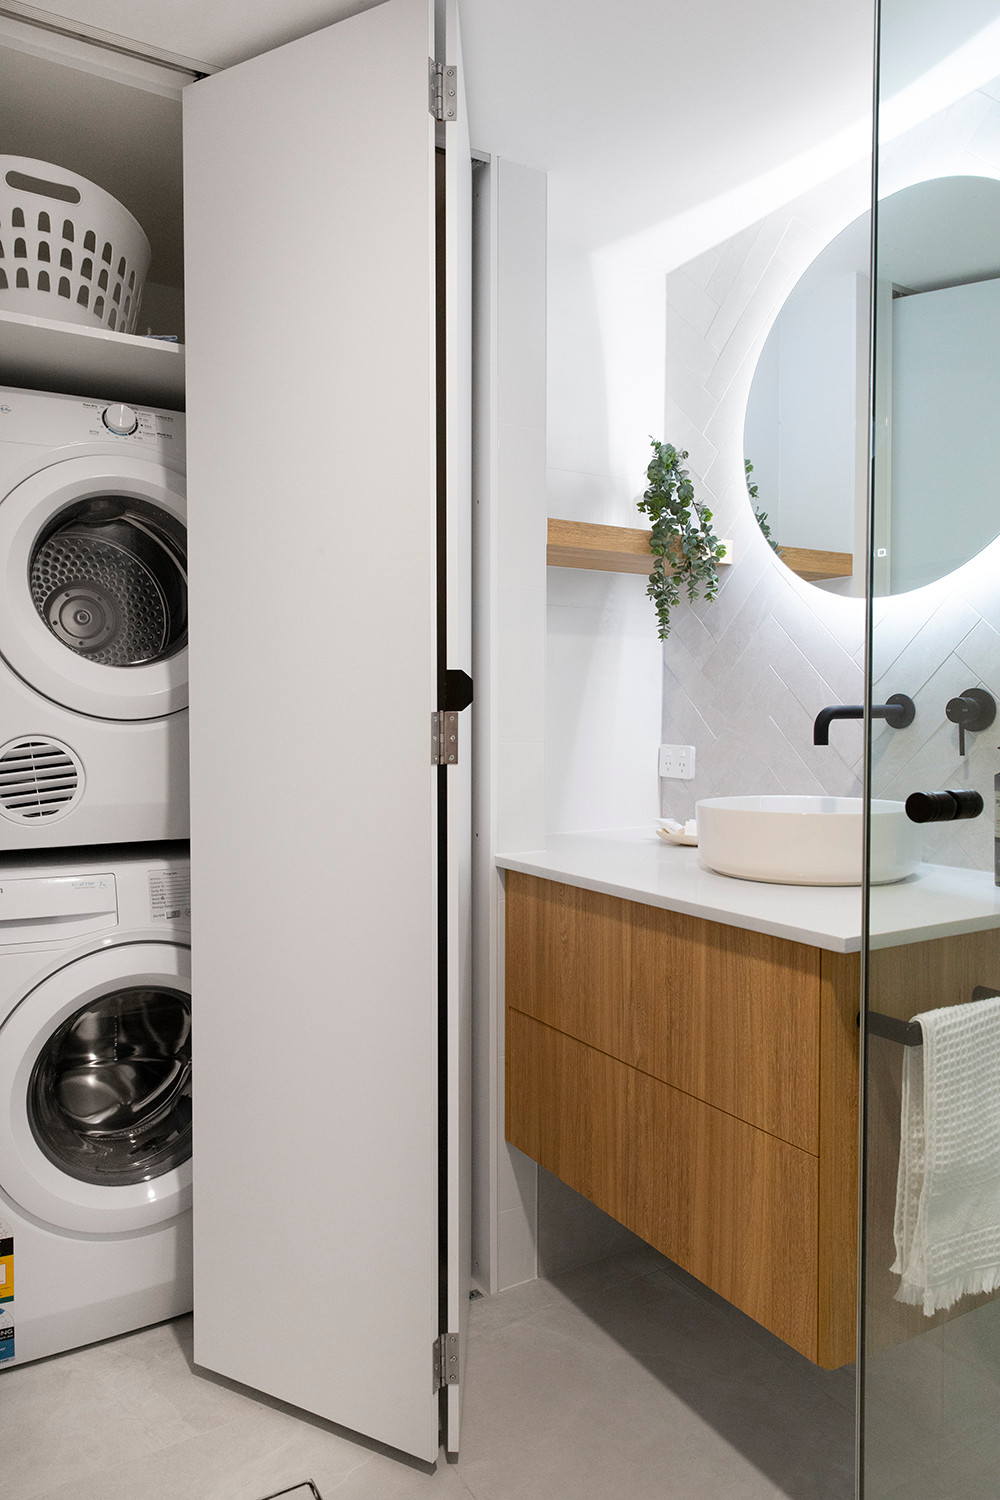 Washer Dryer Bathrooms - Combining a laundry and bathroom makes sense!